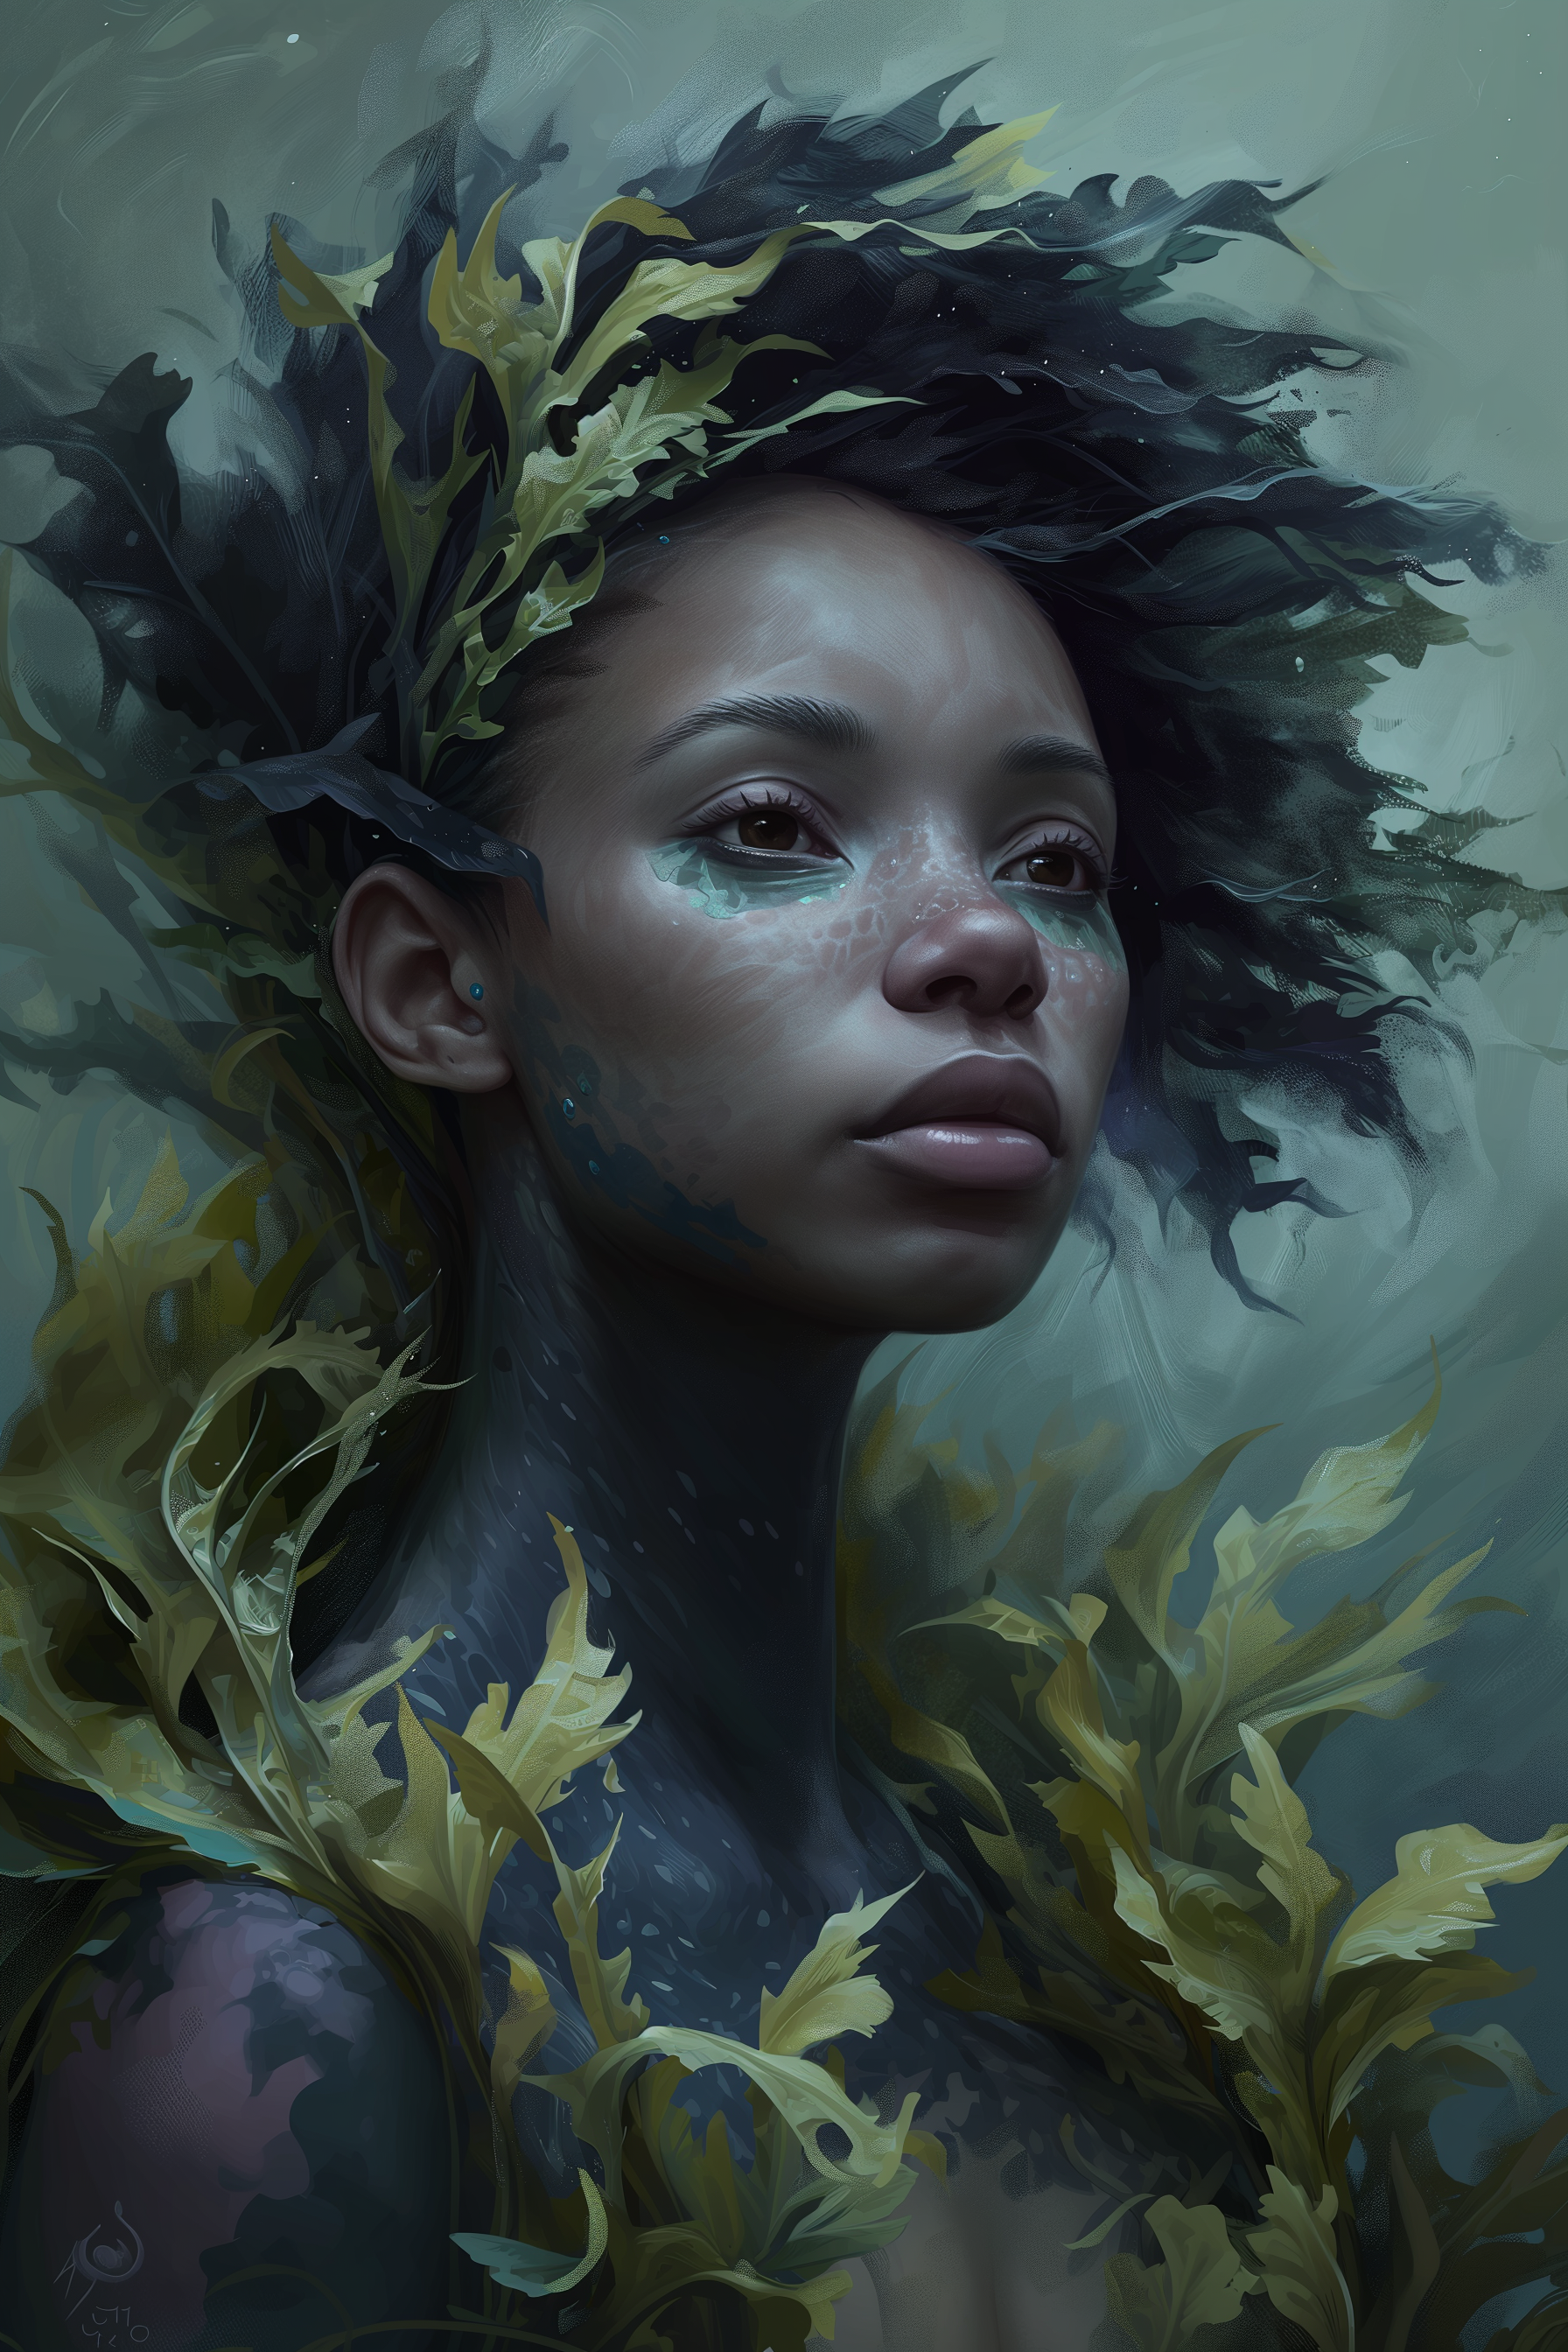 A female triton with dark skin and black and green hair that resembles seaweed.